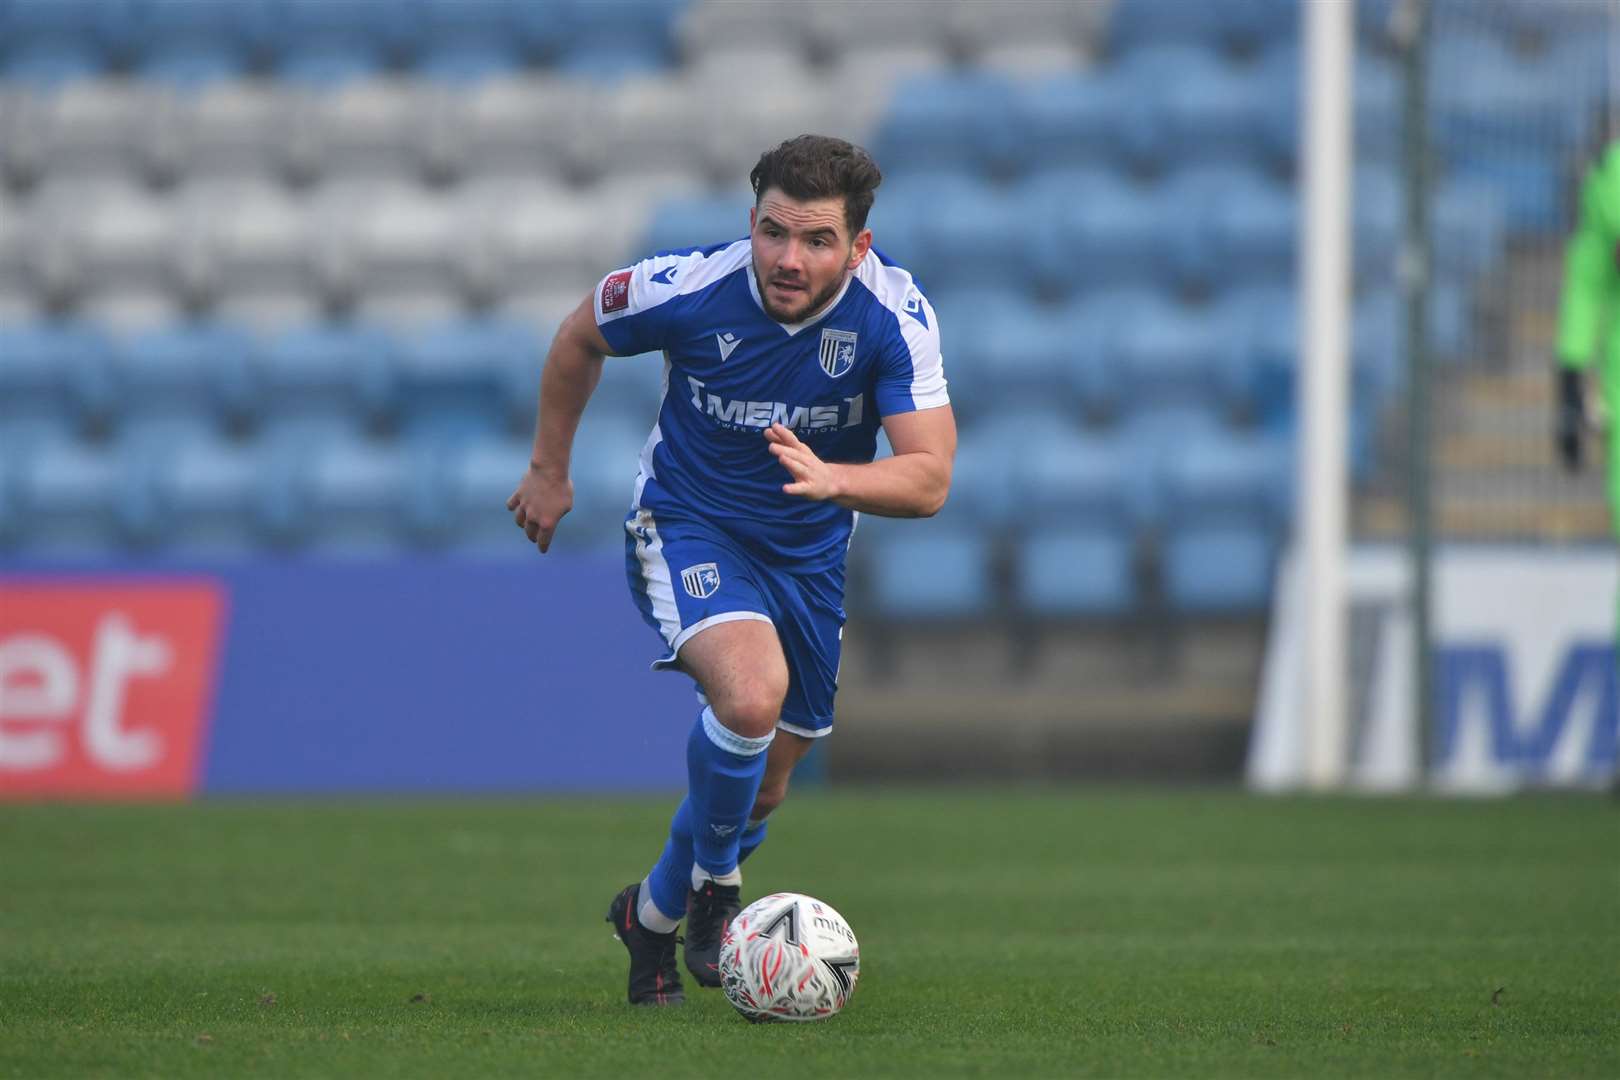 Gillingham midfielder Alex MacDonald is hoping to hold down a regular place in the team